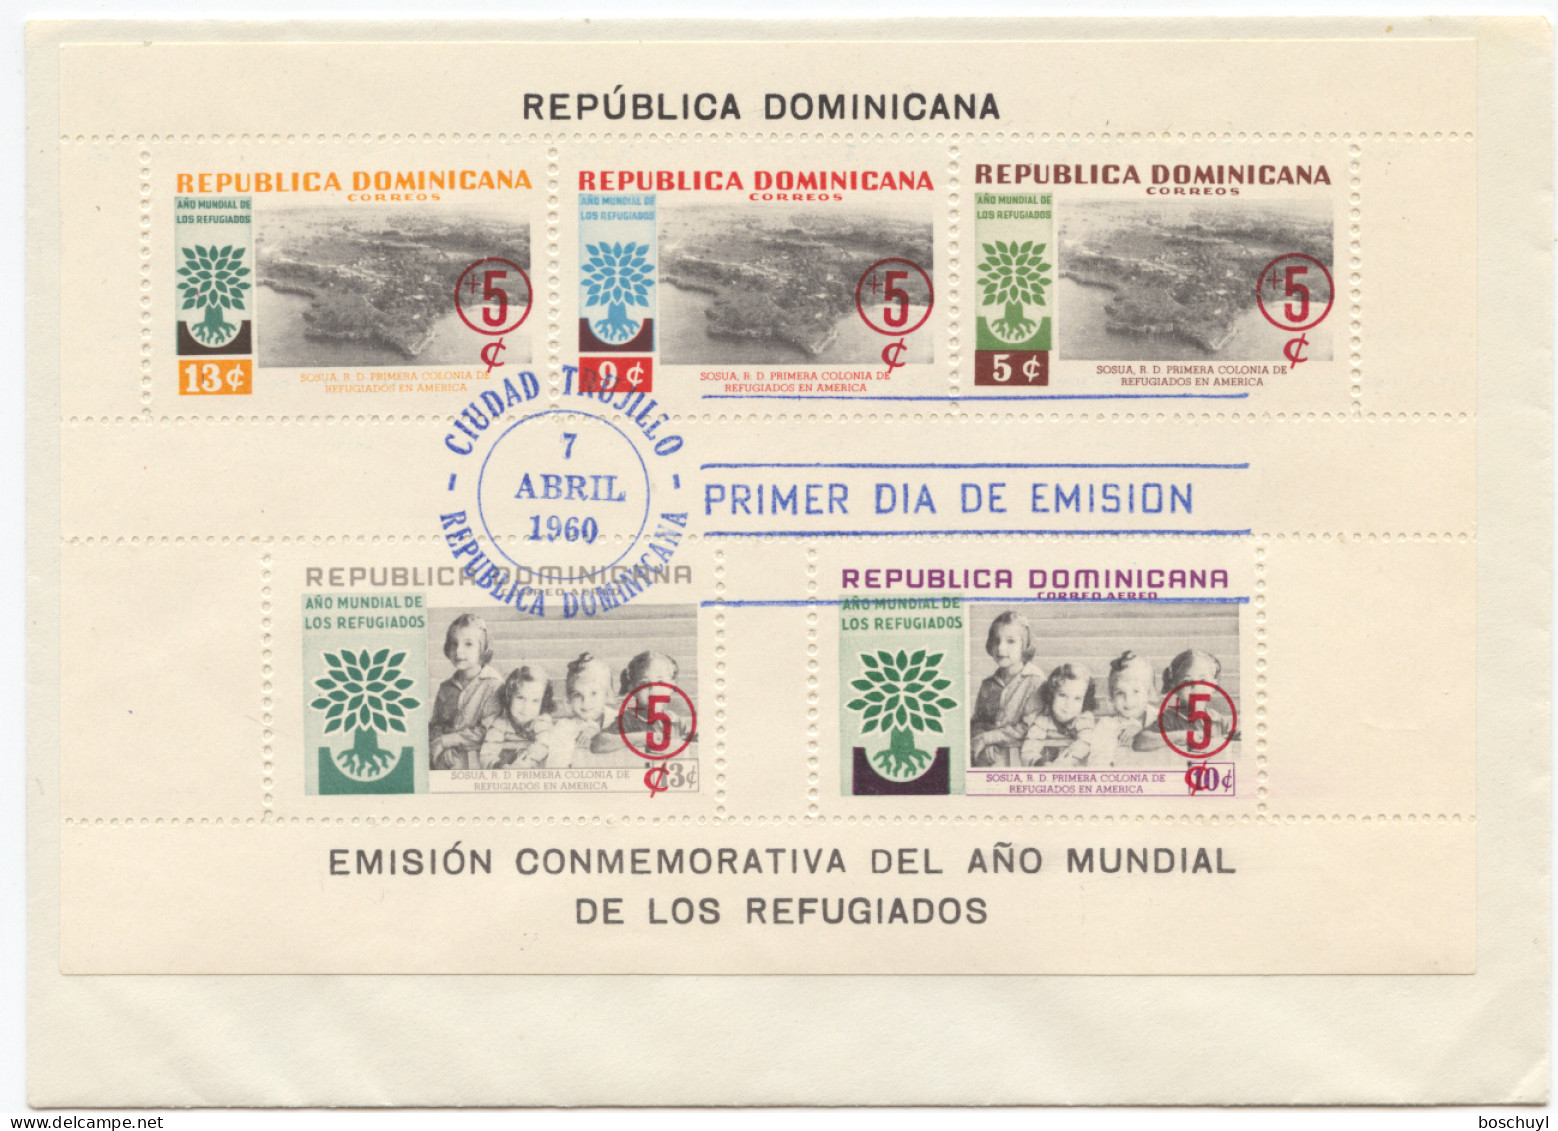 Dominican Republic, 1960, World Refugee Year, WRY, United Nations, Overprinted, On Cover, FD Cancelled, Michel Block 24A - Refugiados